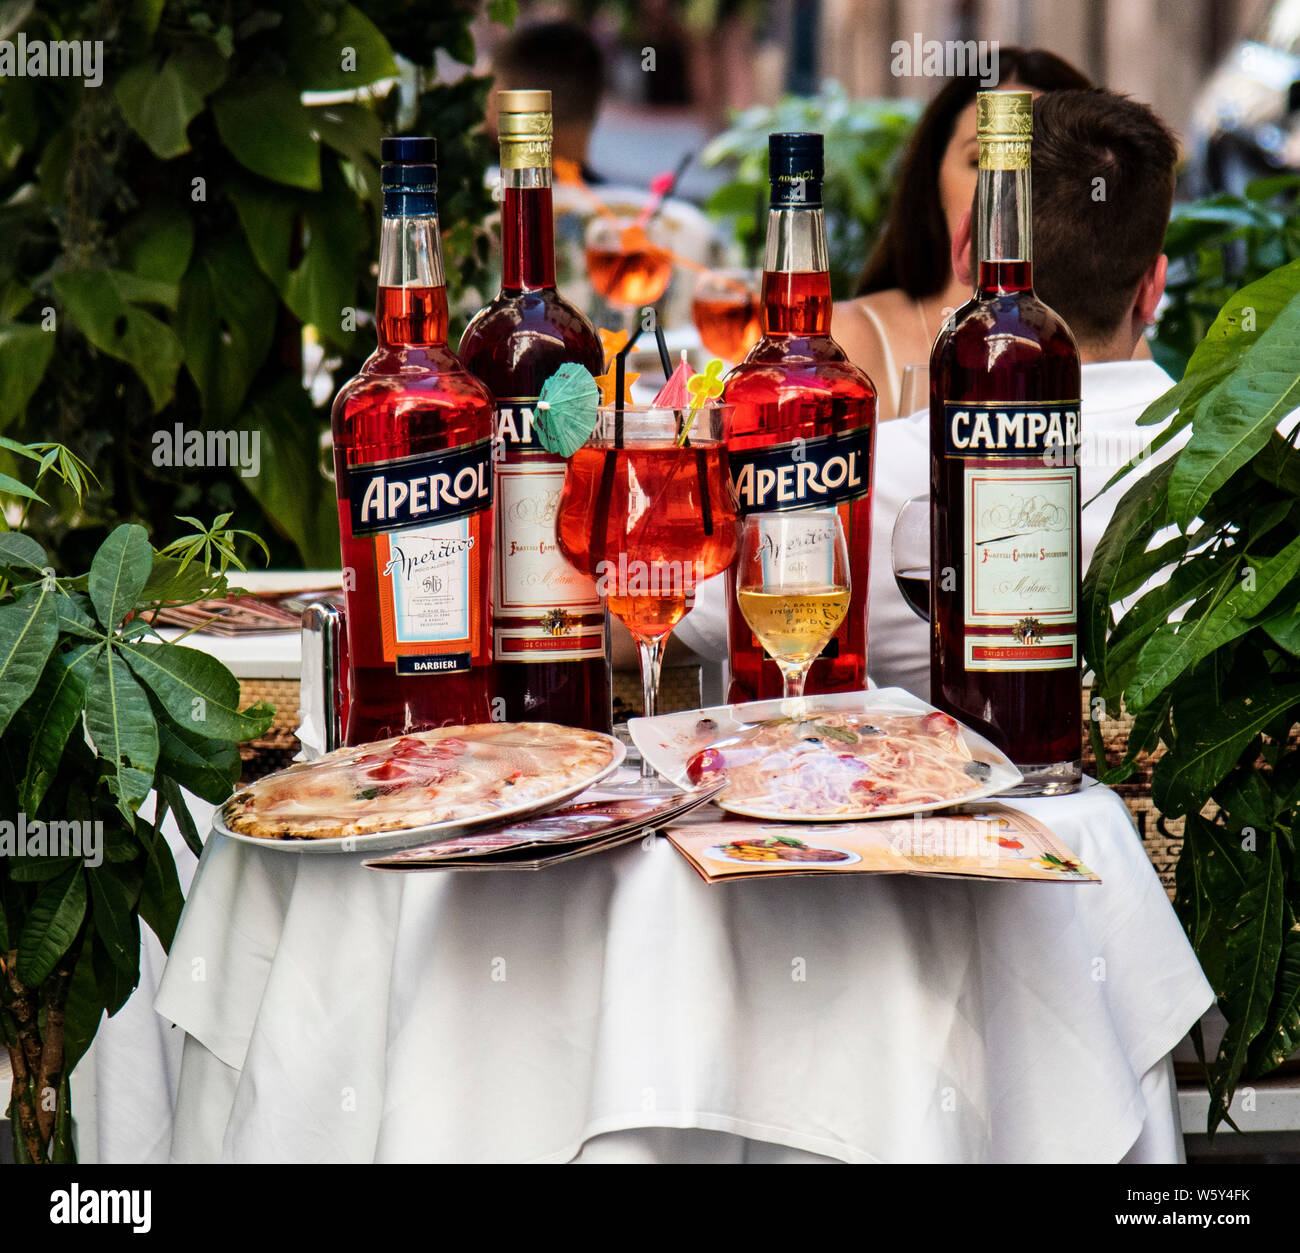 Bottles of Campri and Aperol on a table along pizza's and menus outside a cafe in Rome, italy Stock Photo